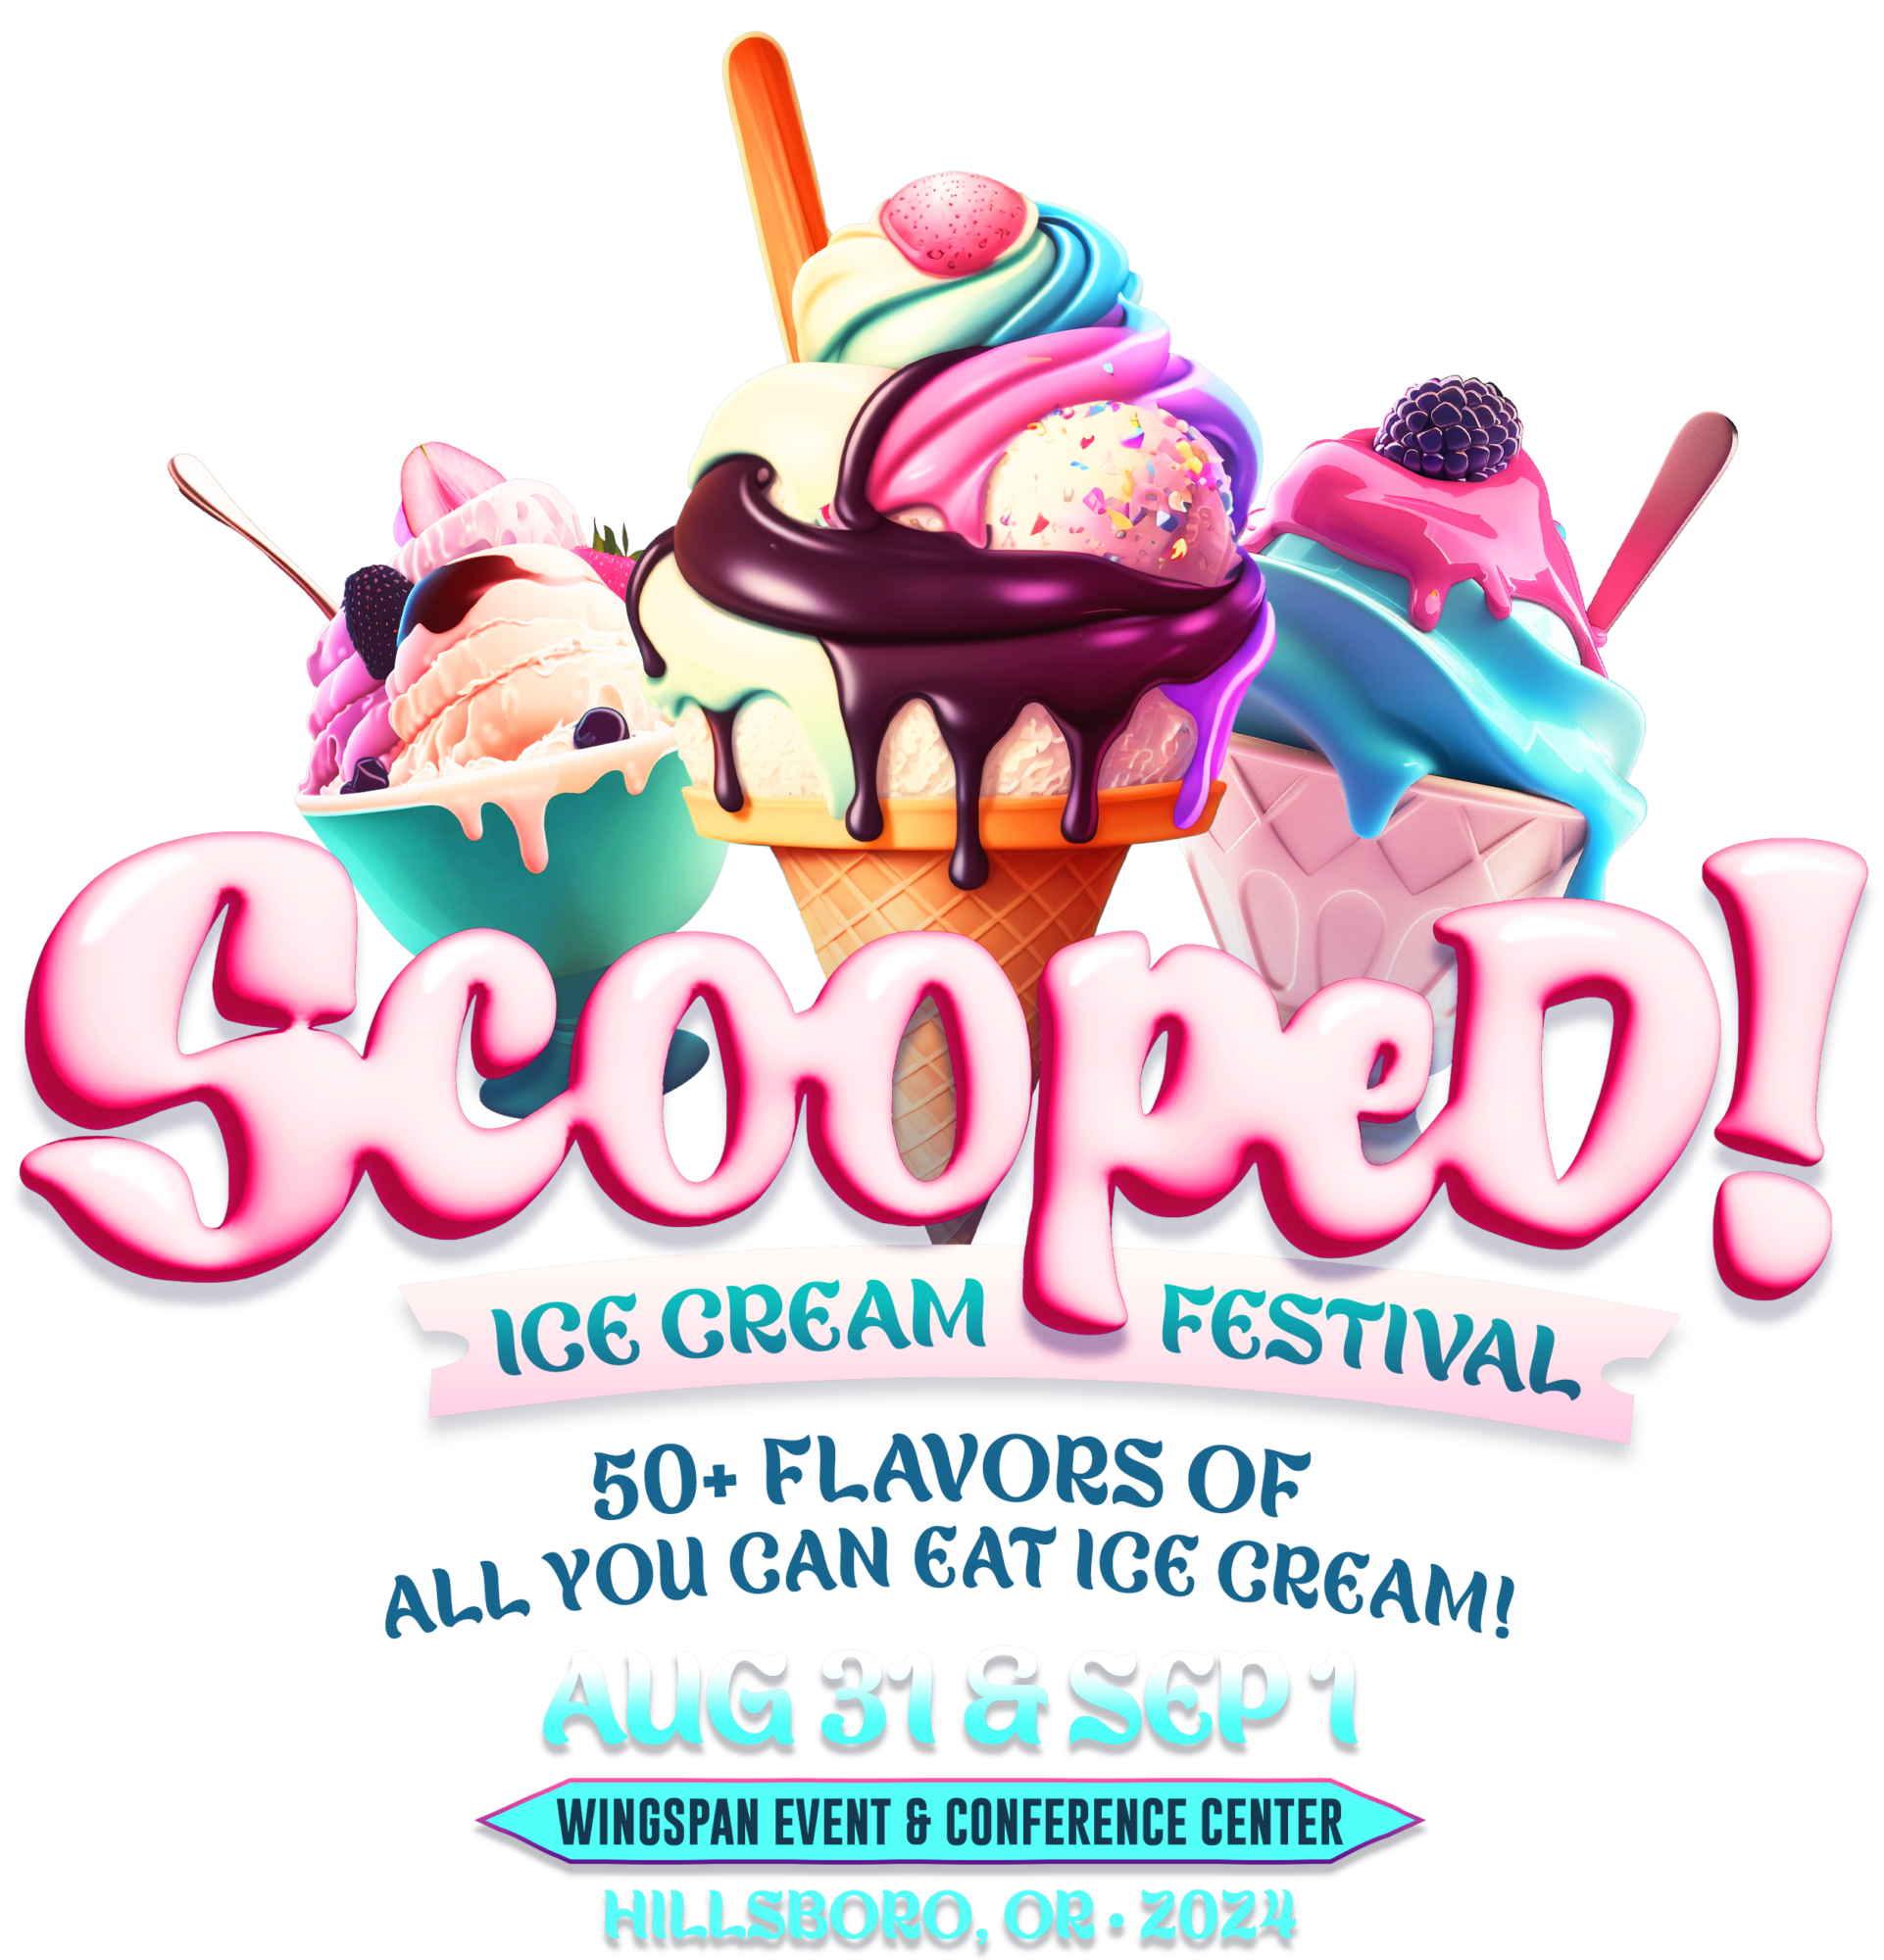 Scooped!™ All-You-Can-Eat Ice Cream Festival Logo